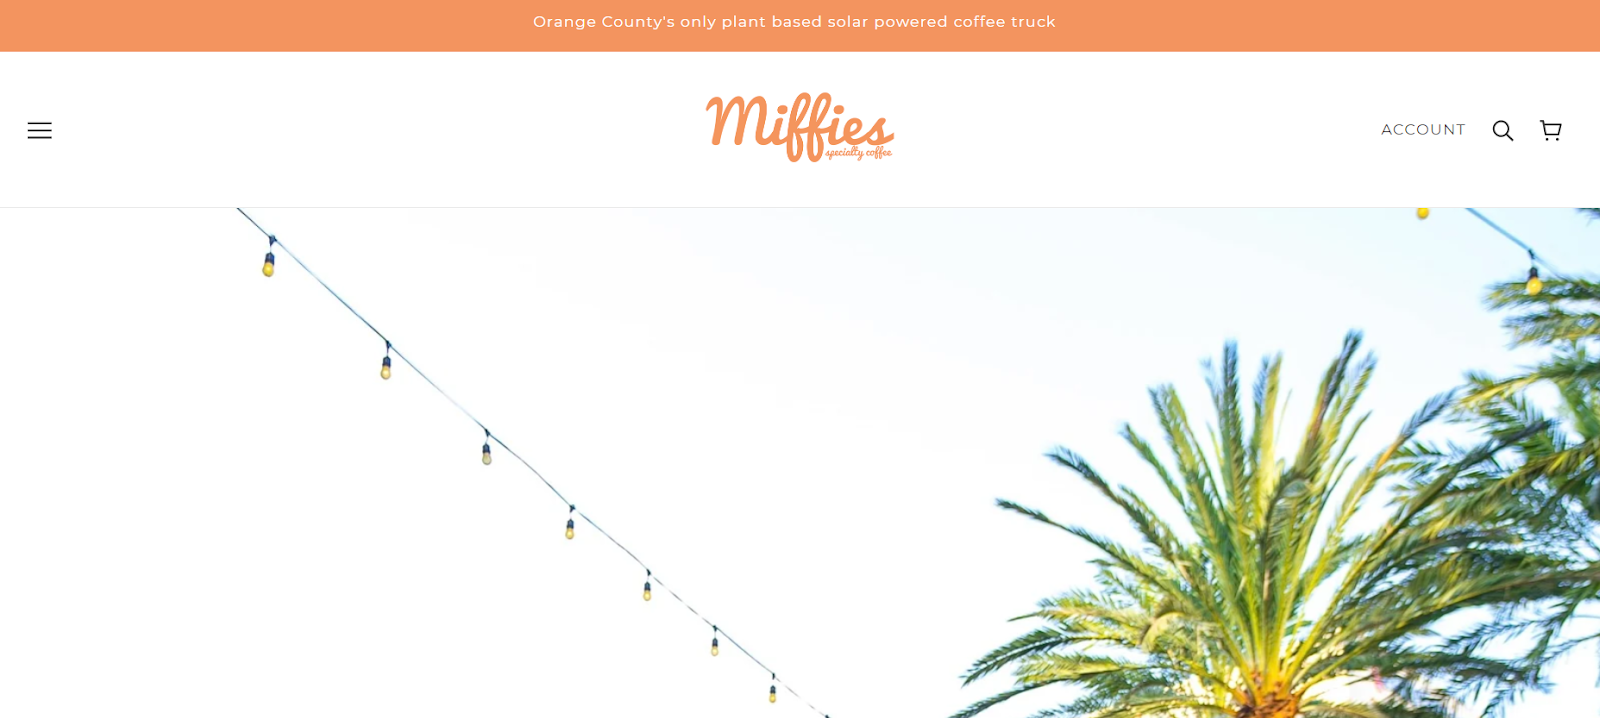 Food truck website design example from Miffies coffee.